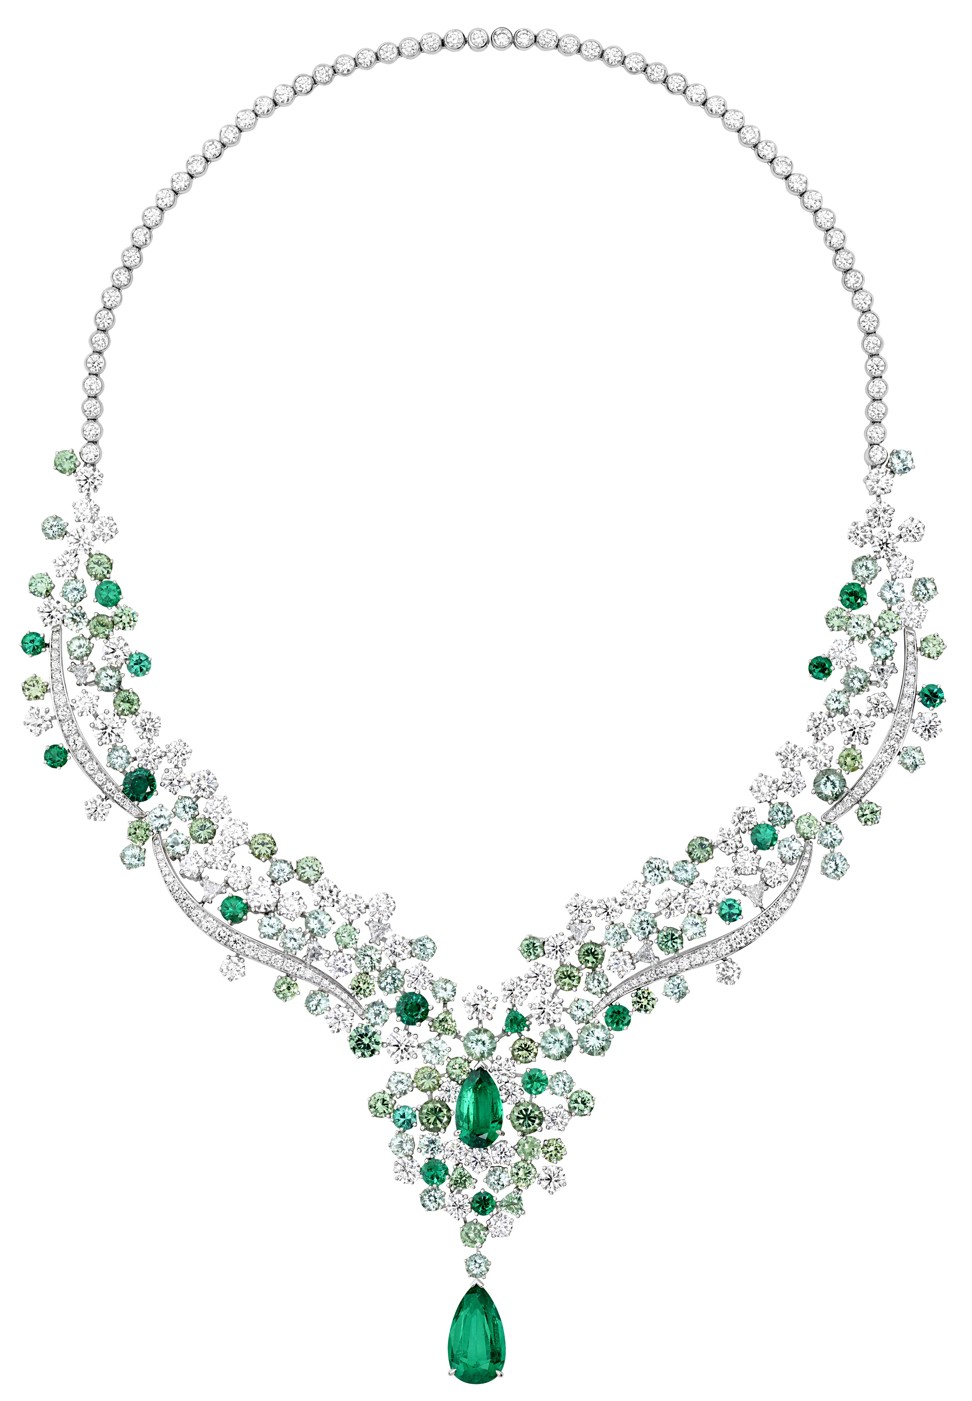 Seven emerald jewellery pieces to add elegance and make a statement ...